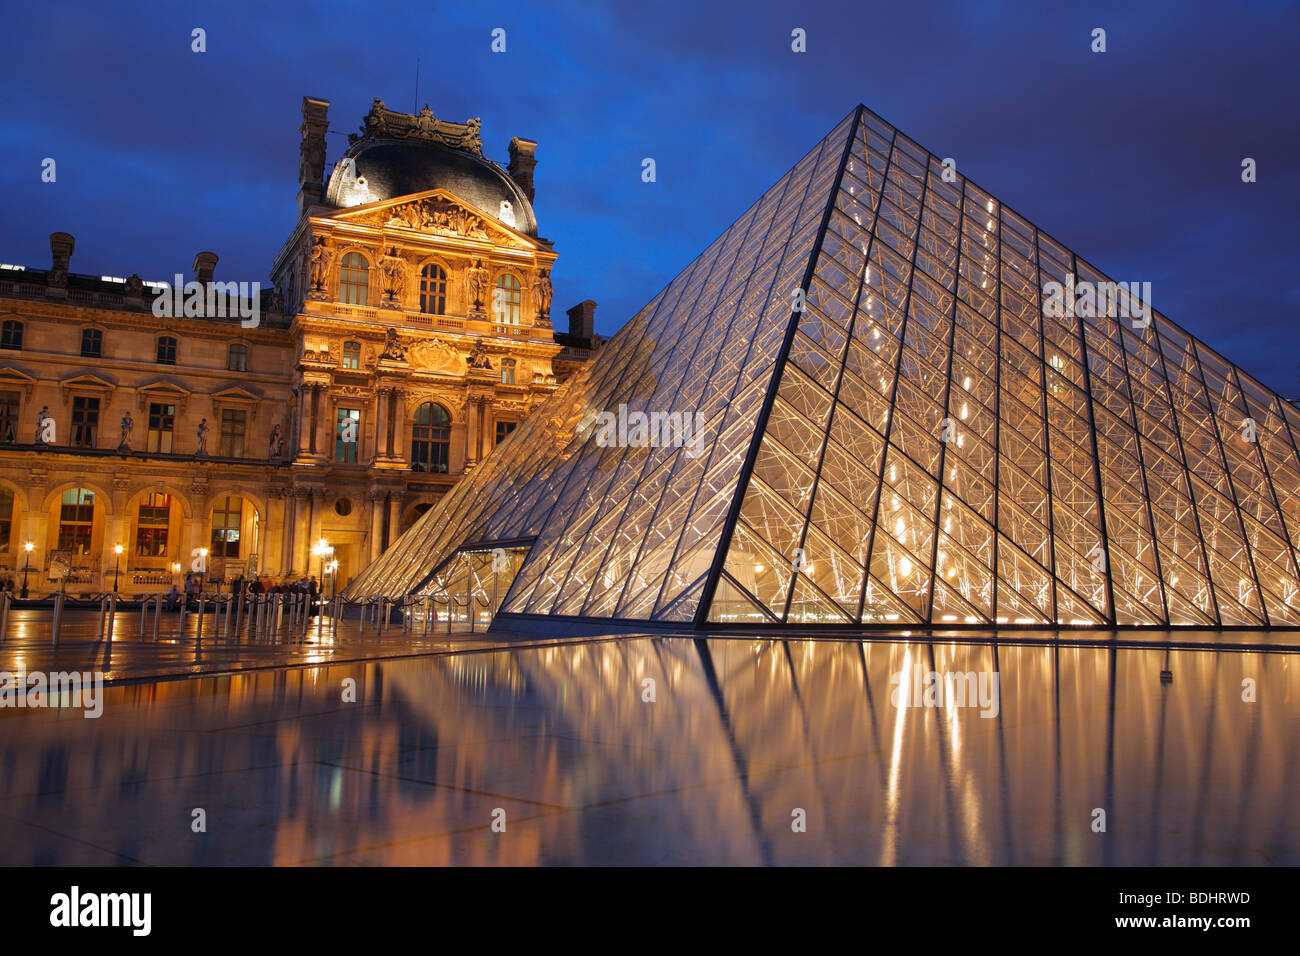 The Louvre Museum at night, Paris, France Stock Photo